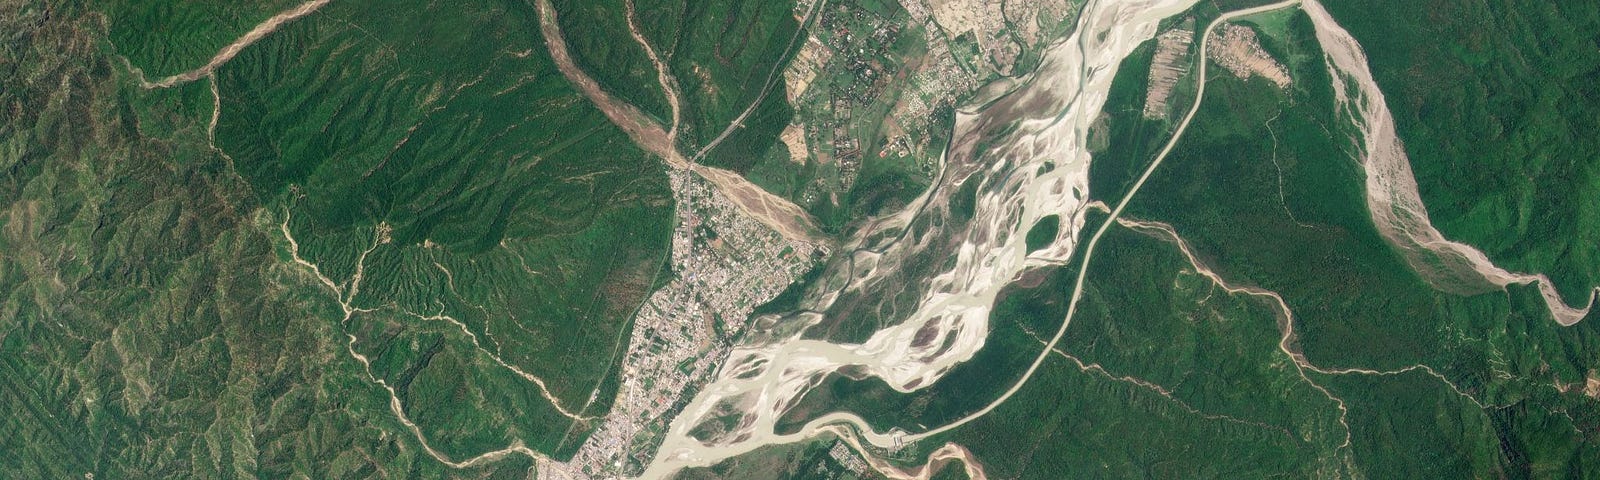 The Ganges River bisects two districts of the Rajaji National Park, alongside densely populated neighborhoods of Haridwar, India. June 2021. PlanetScope.